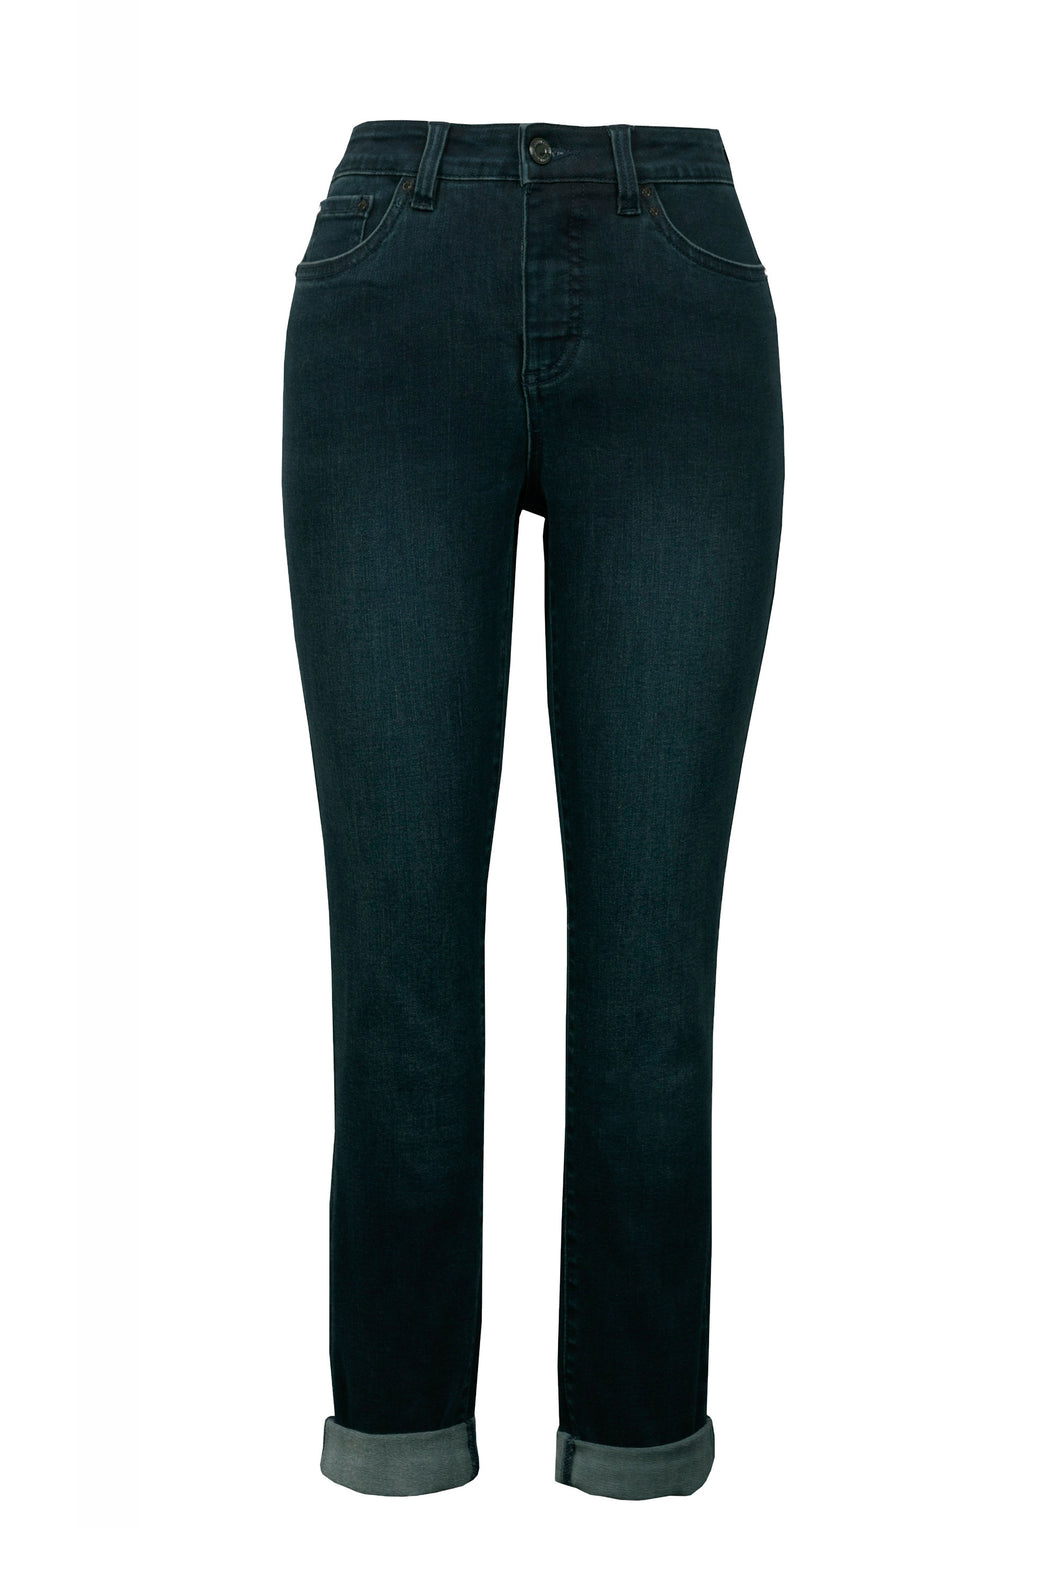 Black Wash Jeans by Joseph Ribkoff available in plus sizes